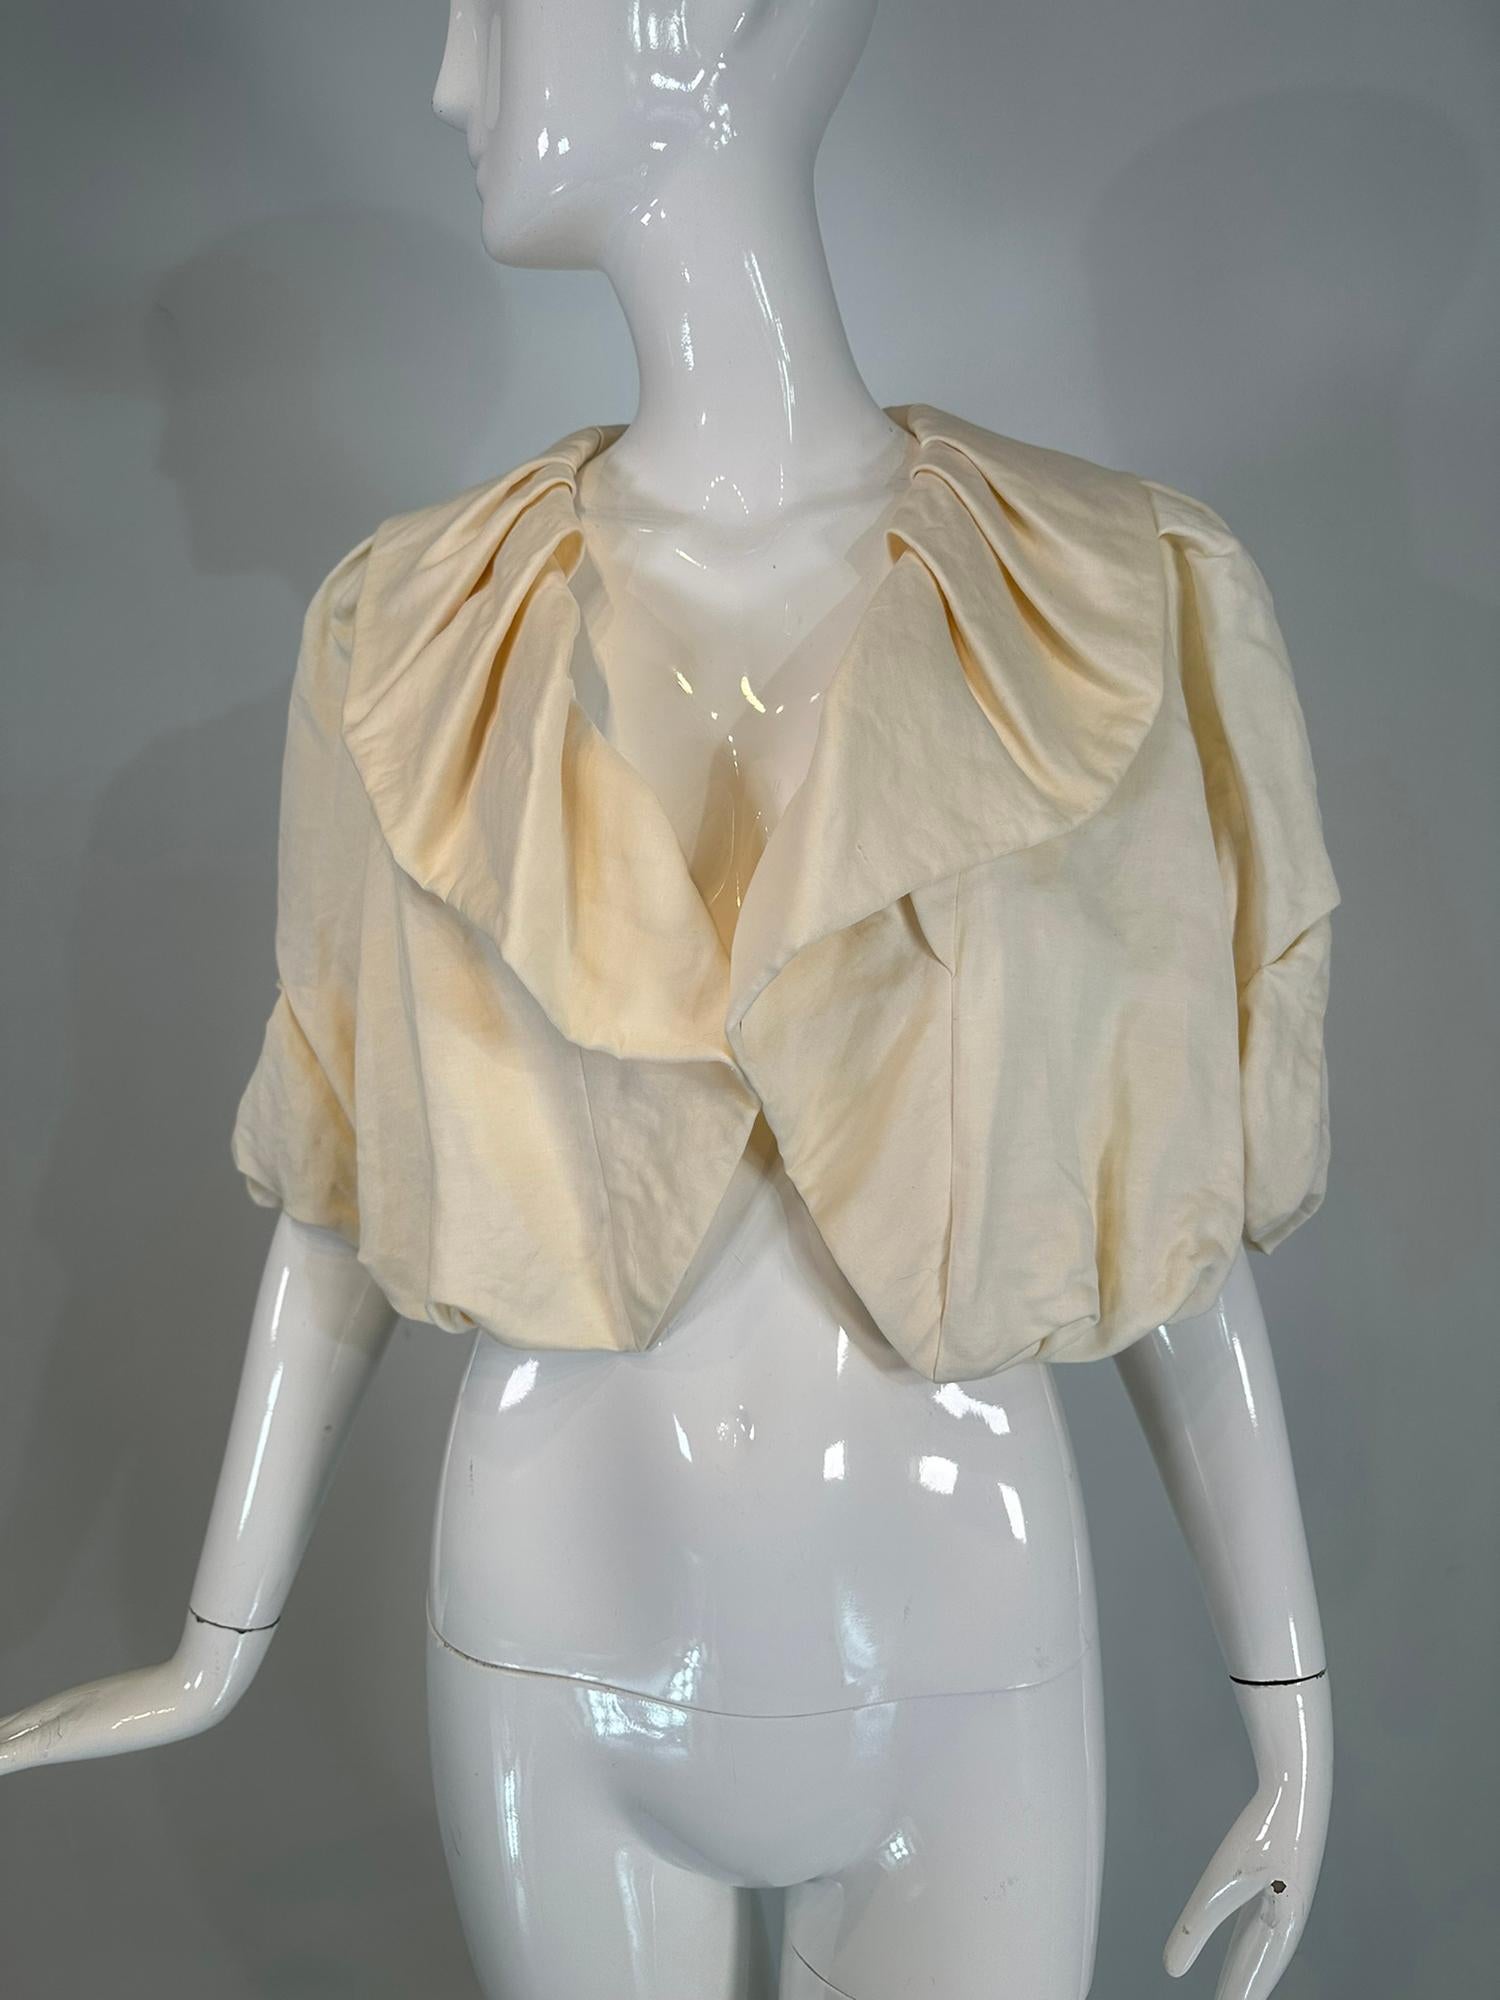 Lanvin Ete' Albert Elbaz 2006 cream linen/cotton blend shawl collar, cropped, puff sleeve jacket, unworn with tags. Deep pleated shawl collar, short puff sleeves with an open front & puffy hem. Lined in cream cotton. Unworn with the original tags,